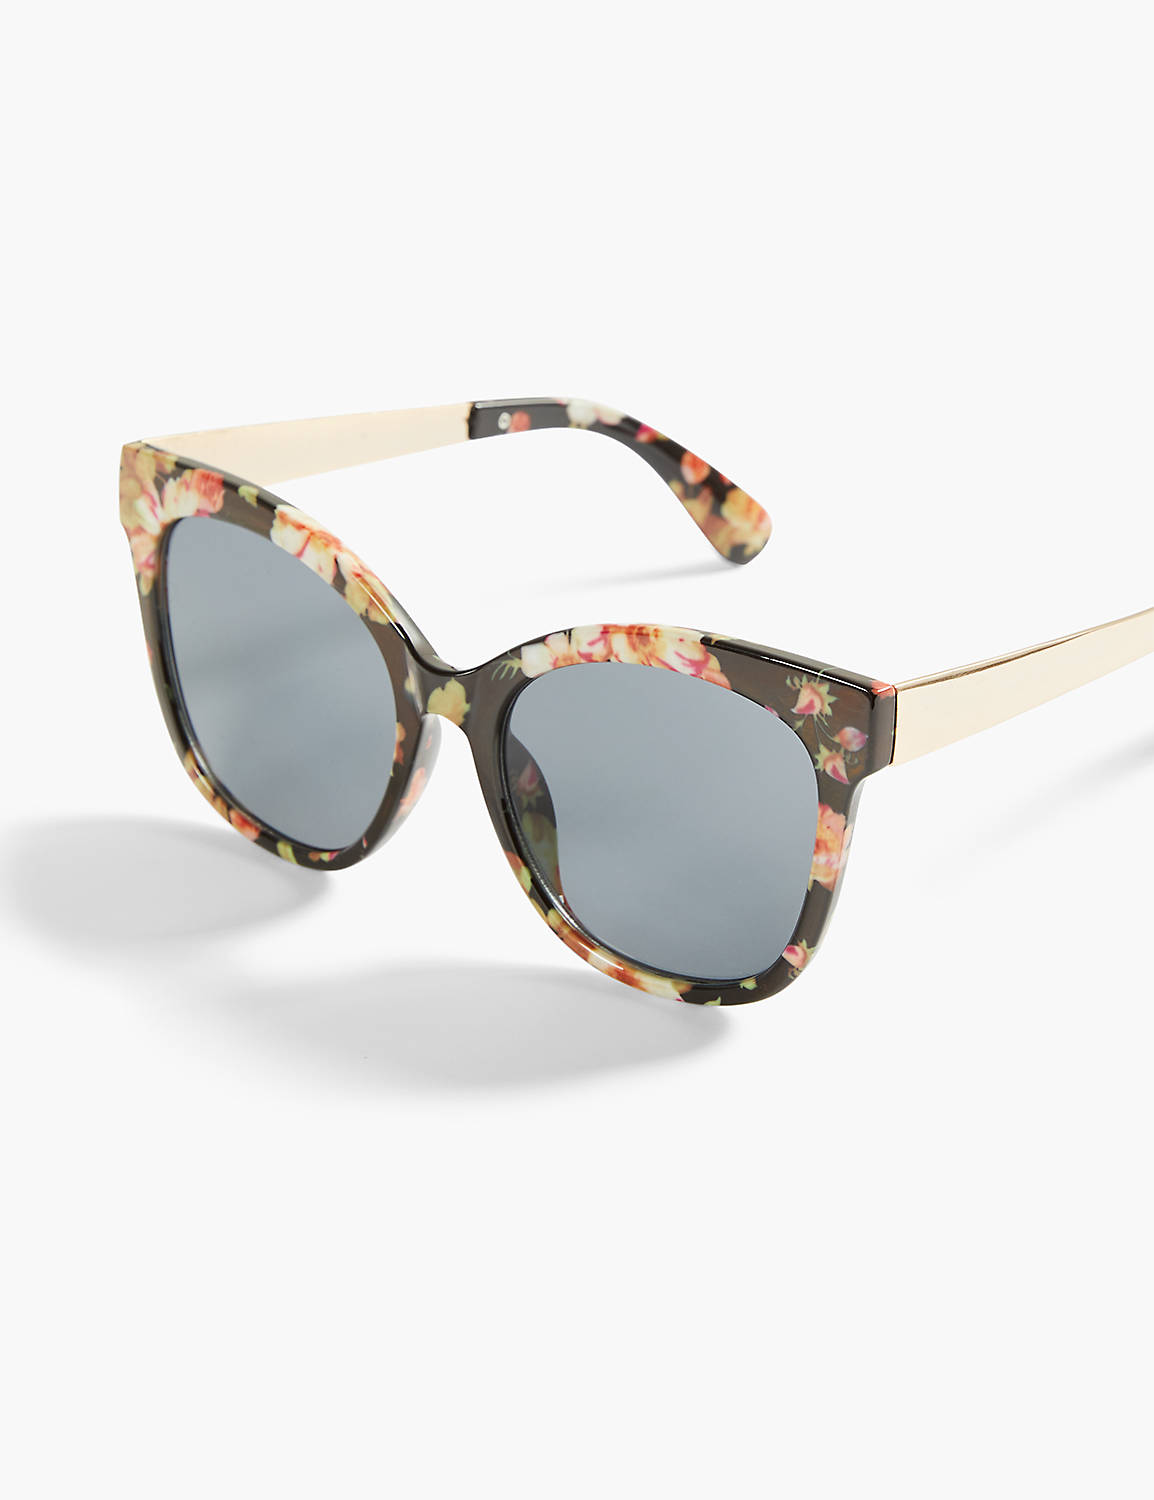 Floral Cateye Sunglass Product Image 1